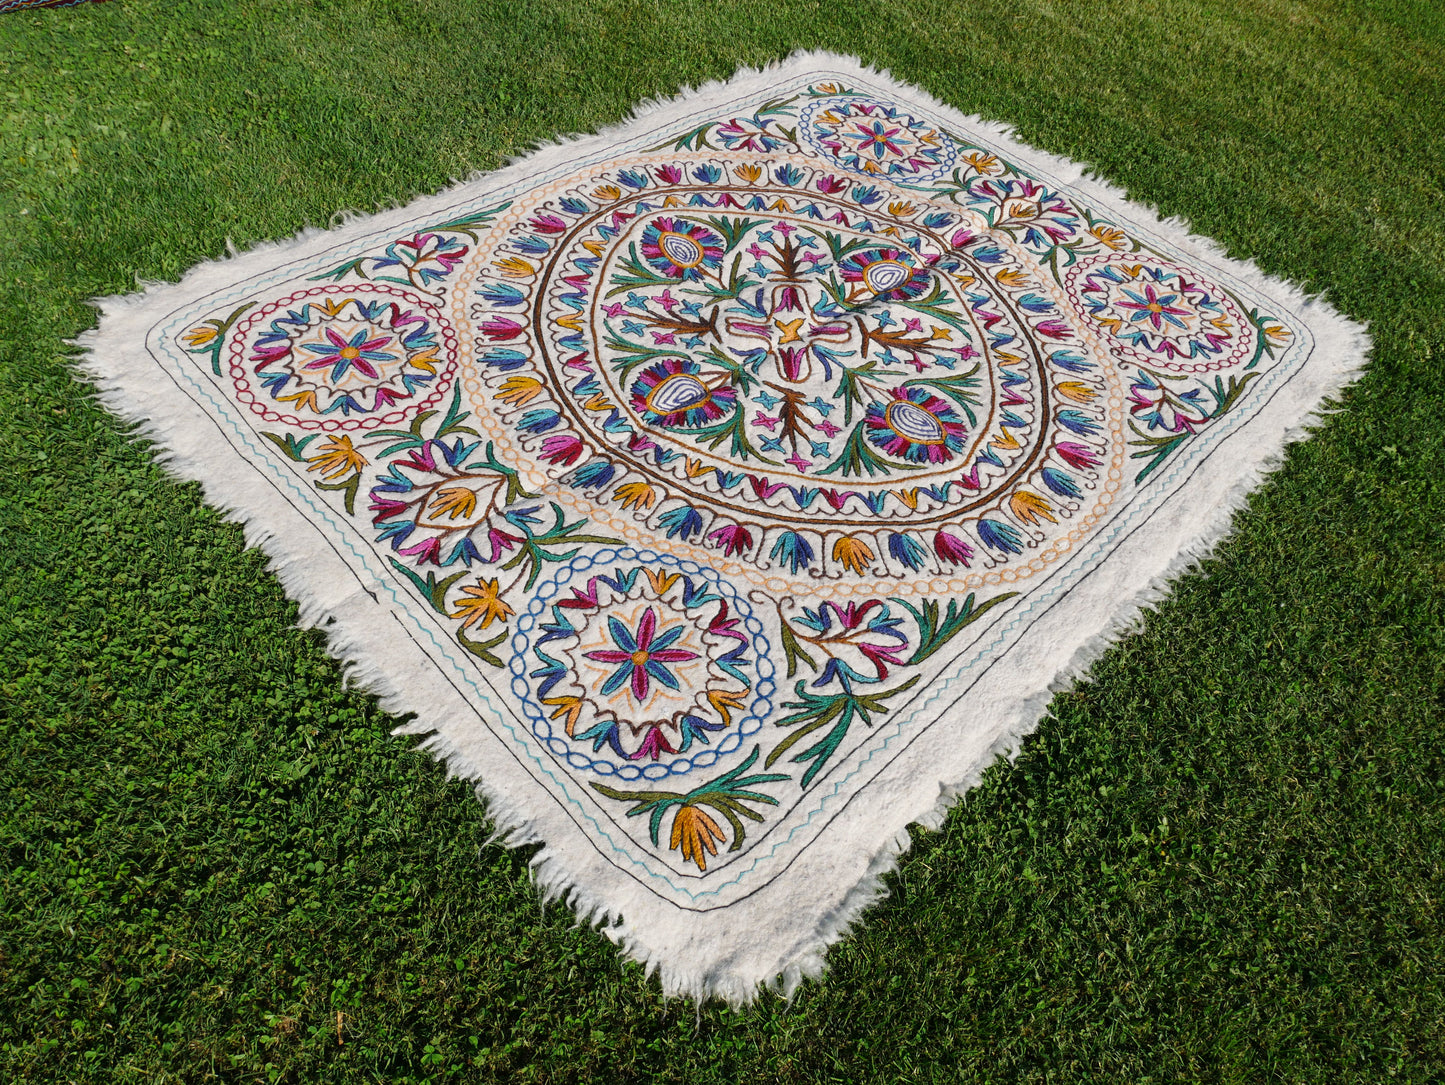 Hand-Felted 7x5 Flower Wool Rug "Namda" from Kashmir - Unique Floral Embroidery on Sheep Wool Felt Base - Boho Decor for Cozy Floors and Hippie Homes